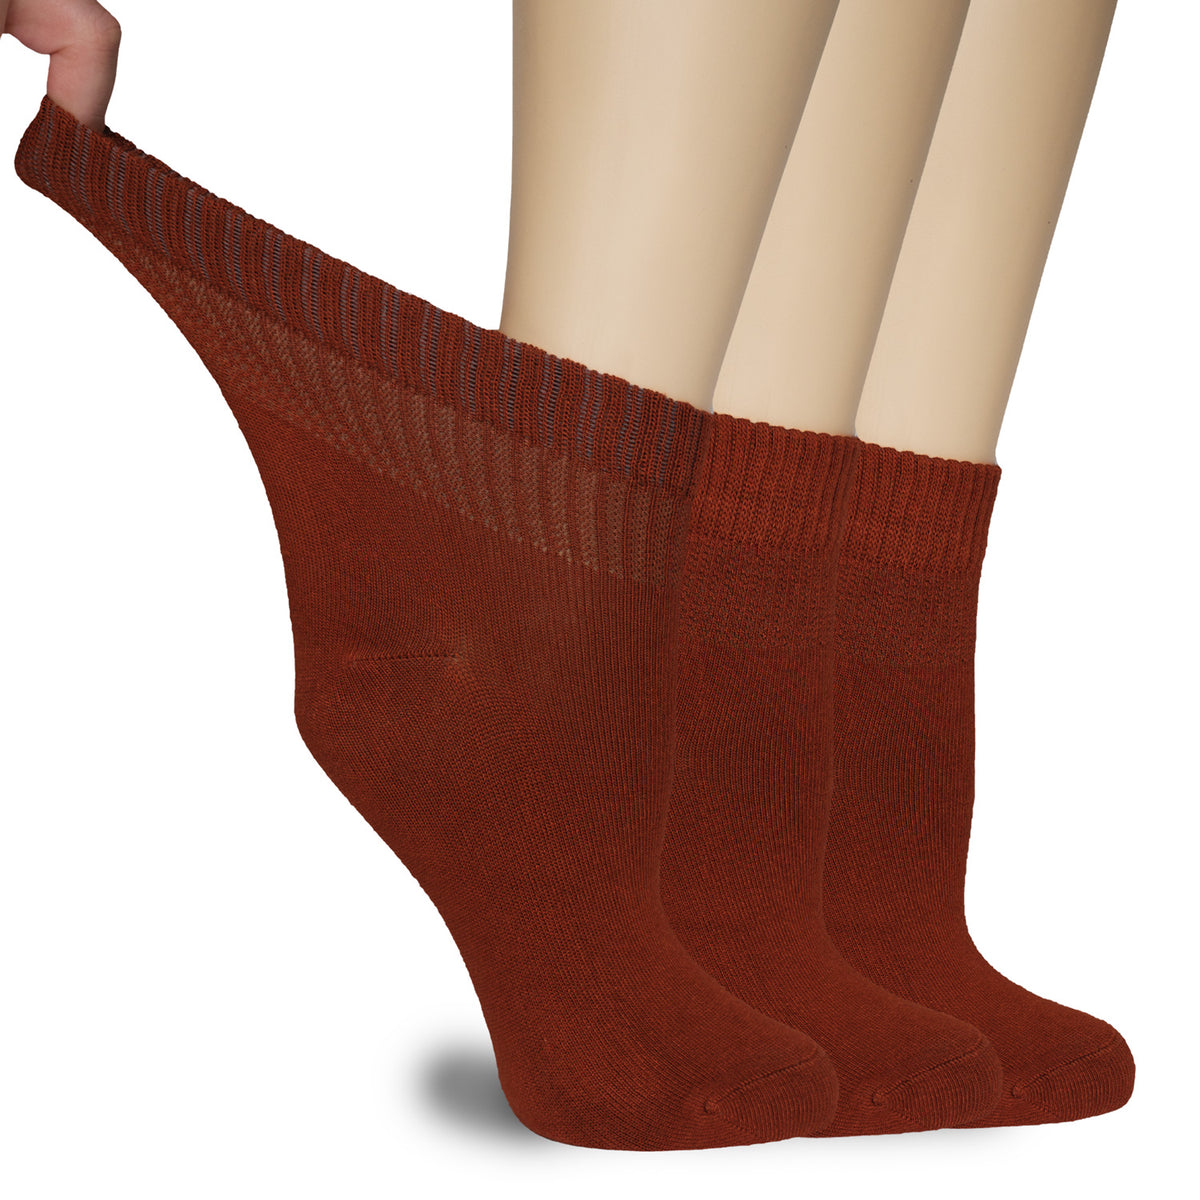 These Women's Diabetic Bamboo Ankle Socks in brown color are designed for women's feet. The socks are made of bamboo material, ideal for sensitive skin.